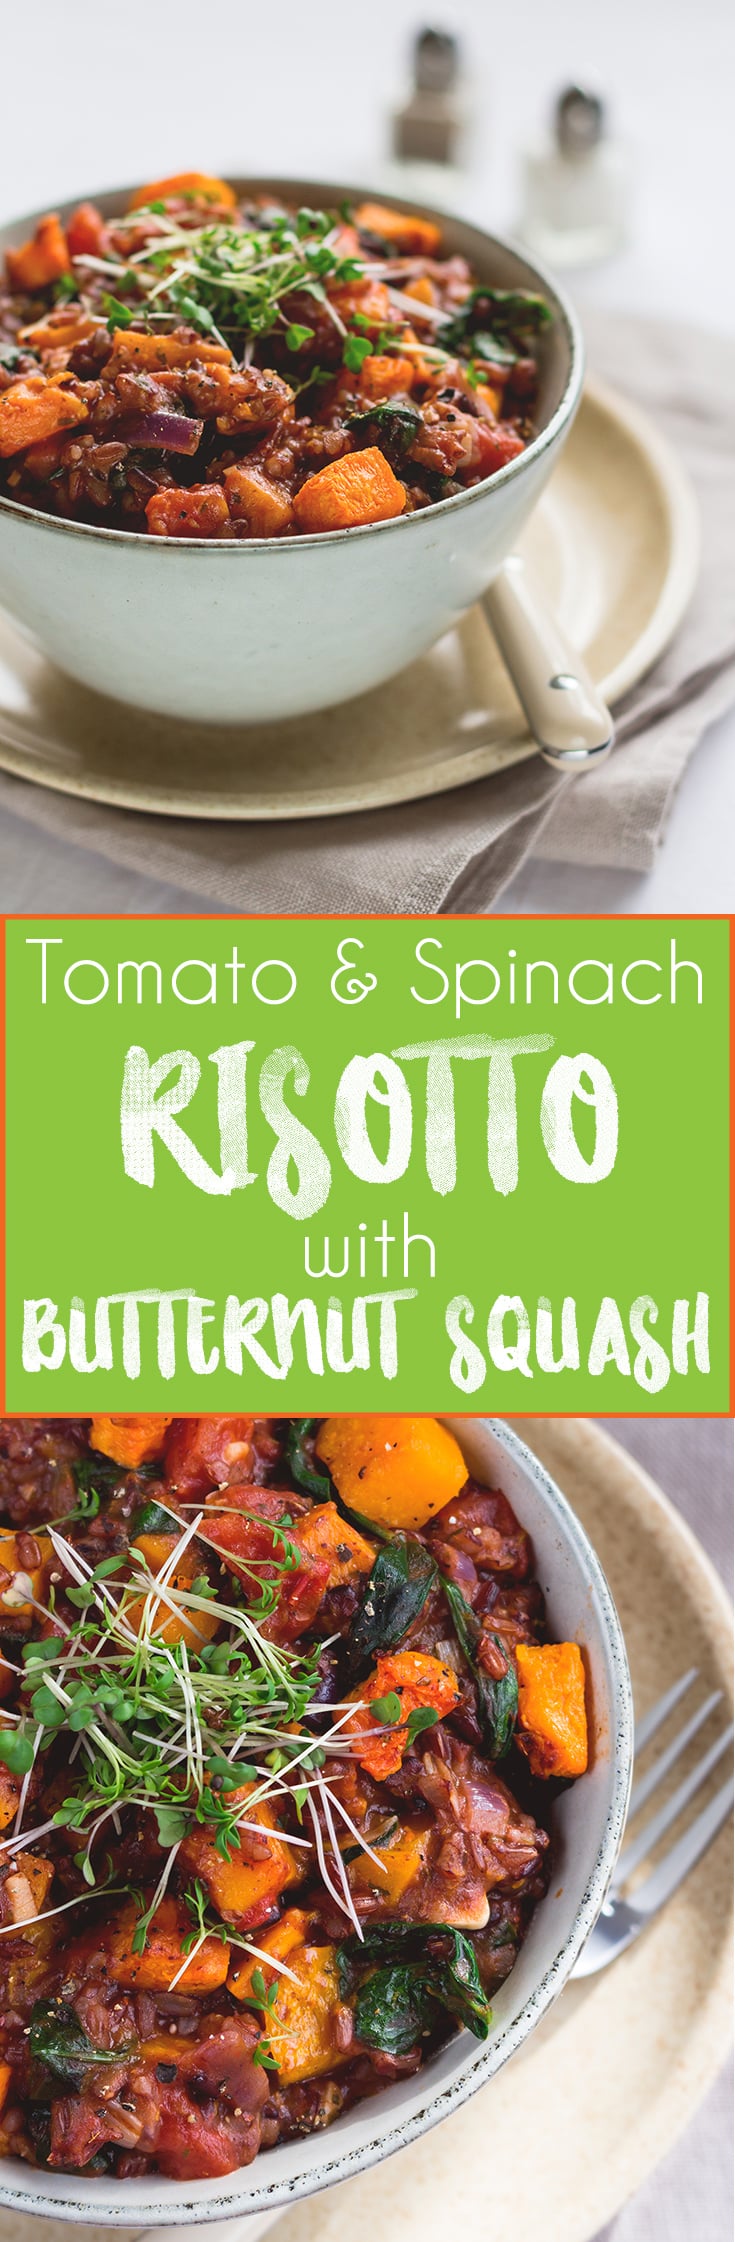 Butternut Squash Risotto with Spinach and Tomatoes - a delicious hearty vegan dinner. Only 4 main ingredients! Plus onion, garlic, dried herbs, salt and pepper! So simple SO YUM. | thehealthfulideas.com